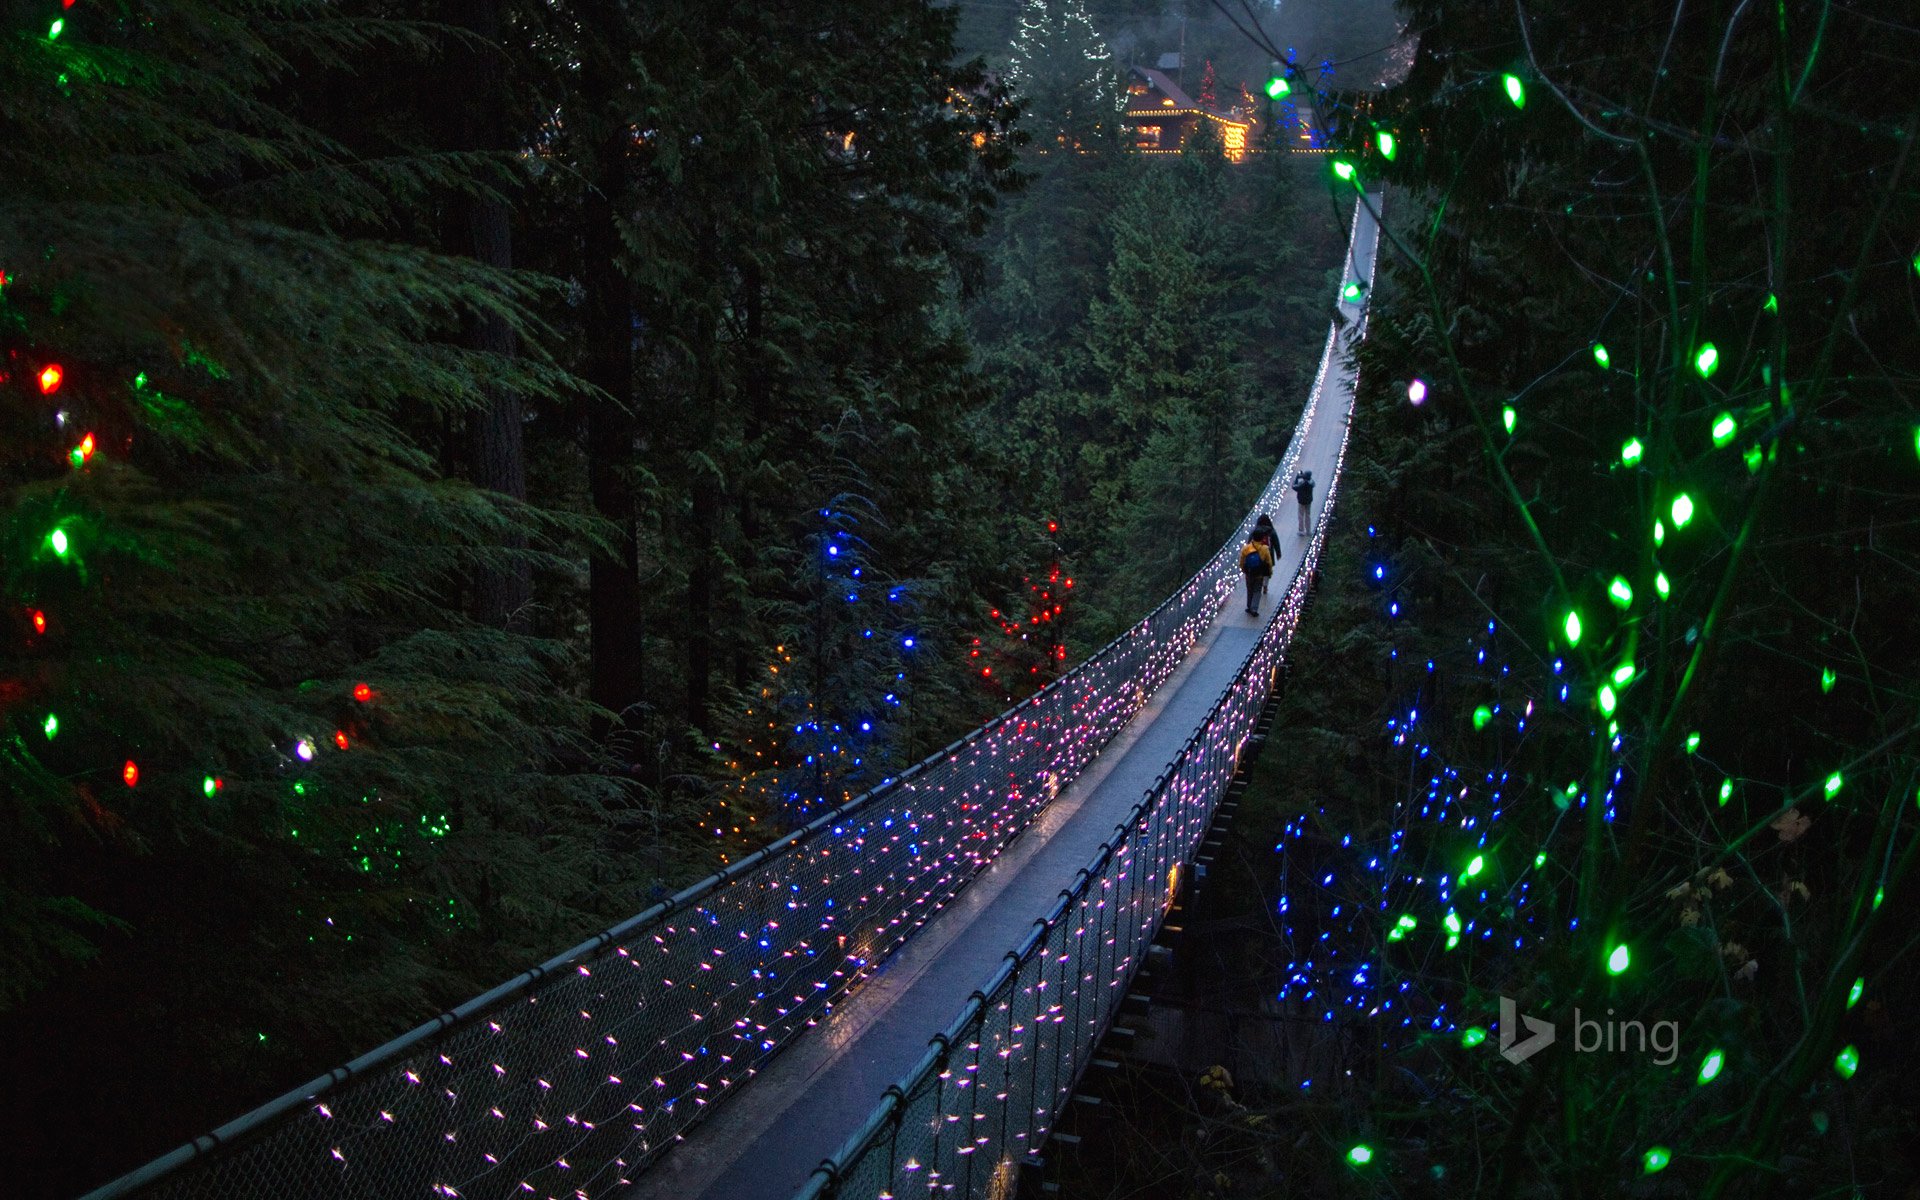 Vancouver British Columbia Canada Capilano British Columbia Canada the suspension bridge bridge trees forest nature holiday lights people landscape wallpaperx1200